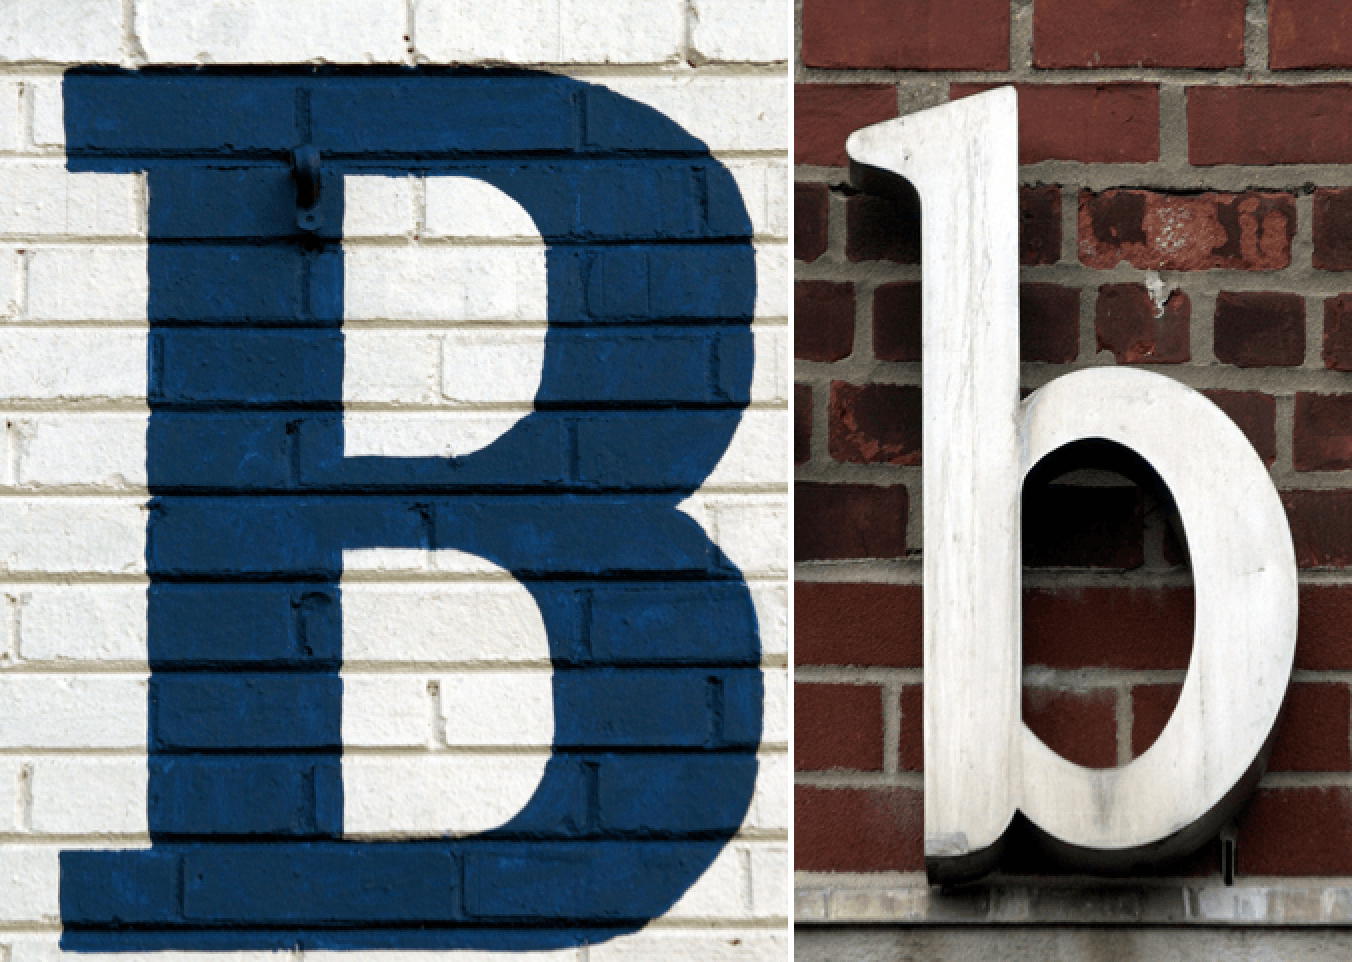 Capital B Logo - Making the case for Black with a capital B. Again